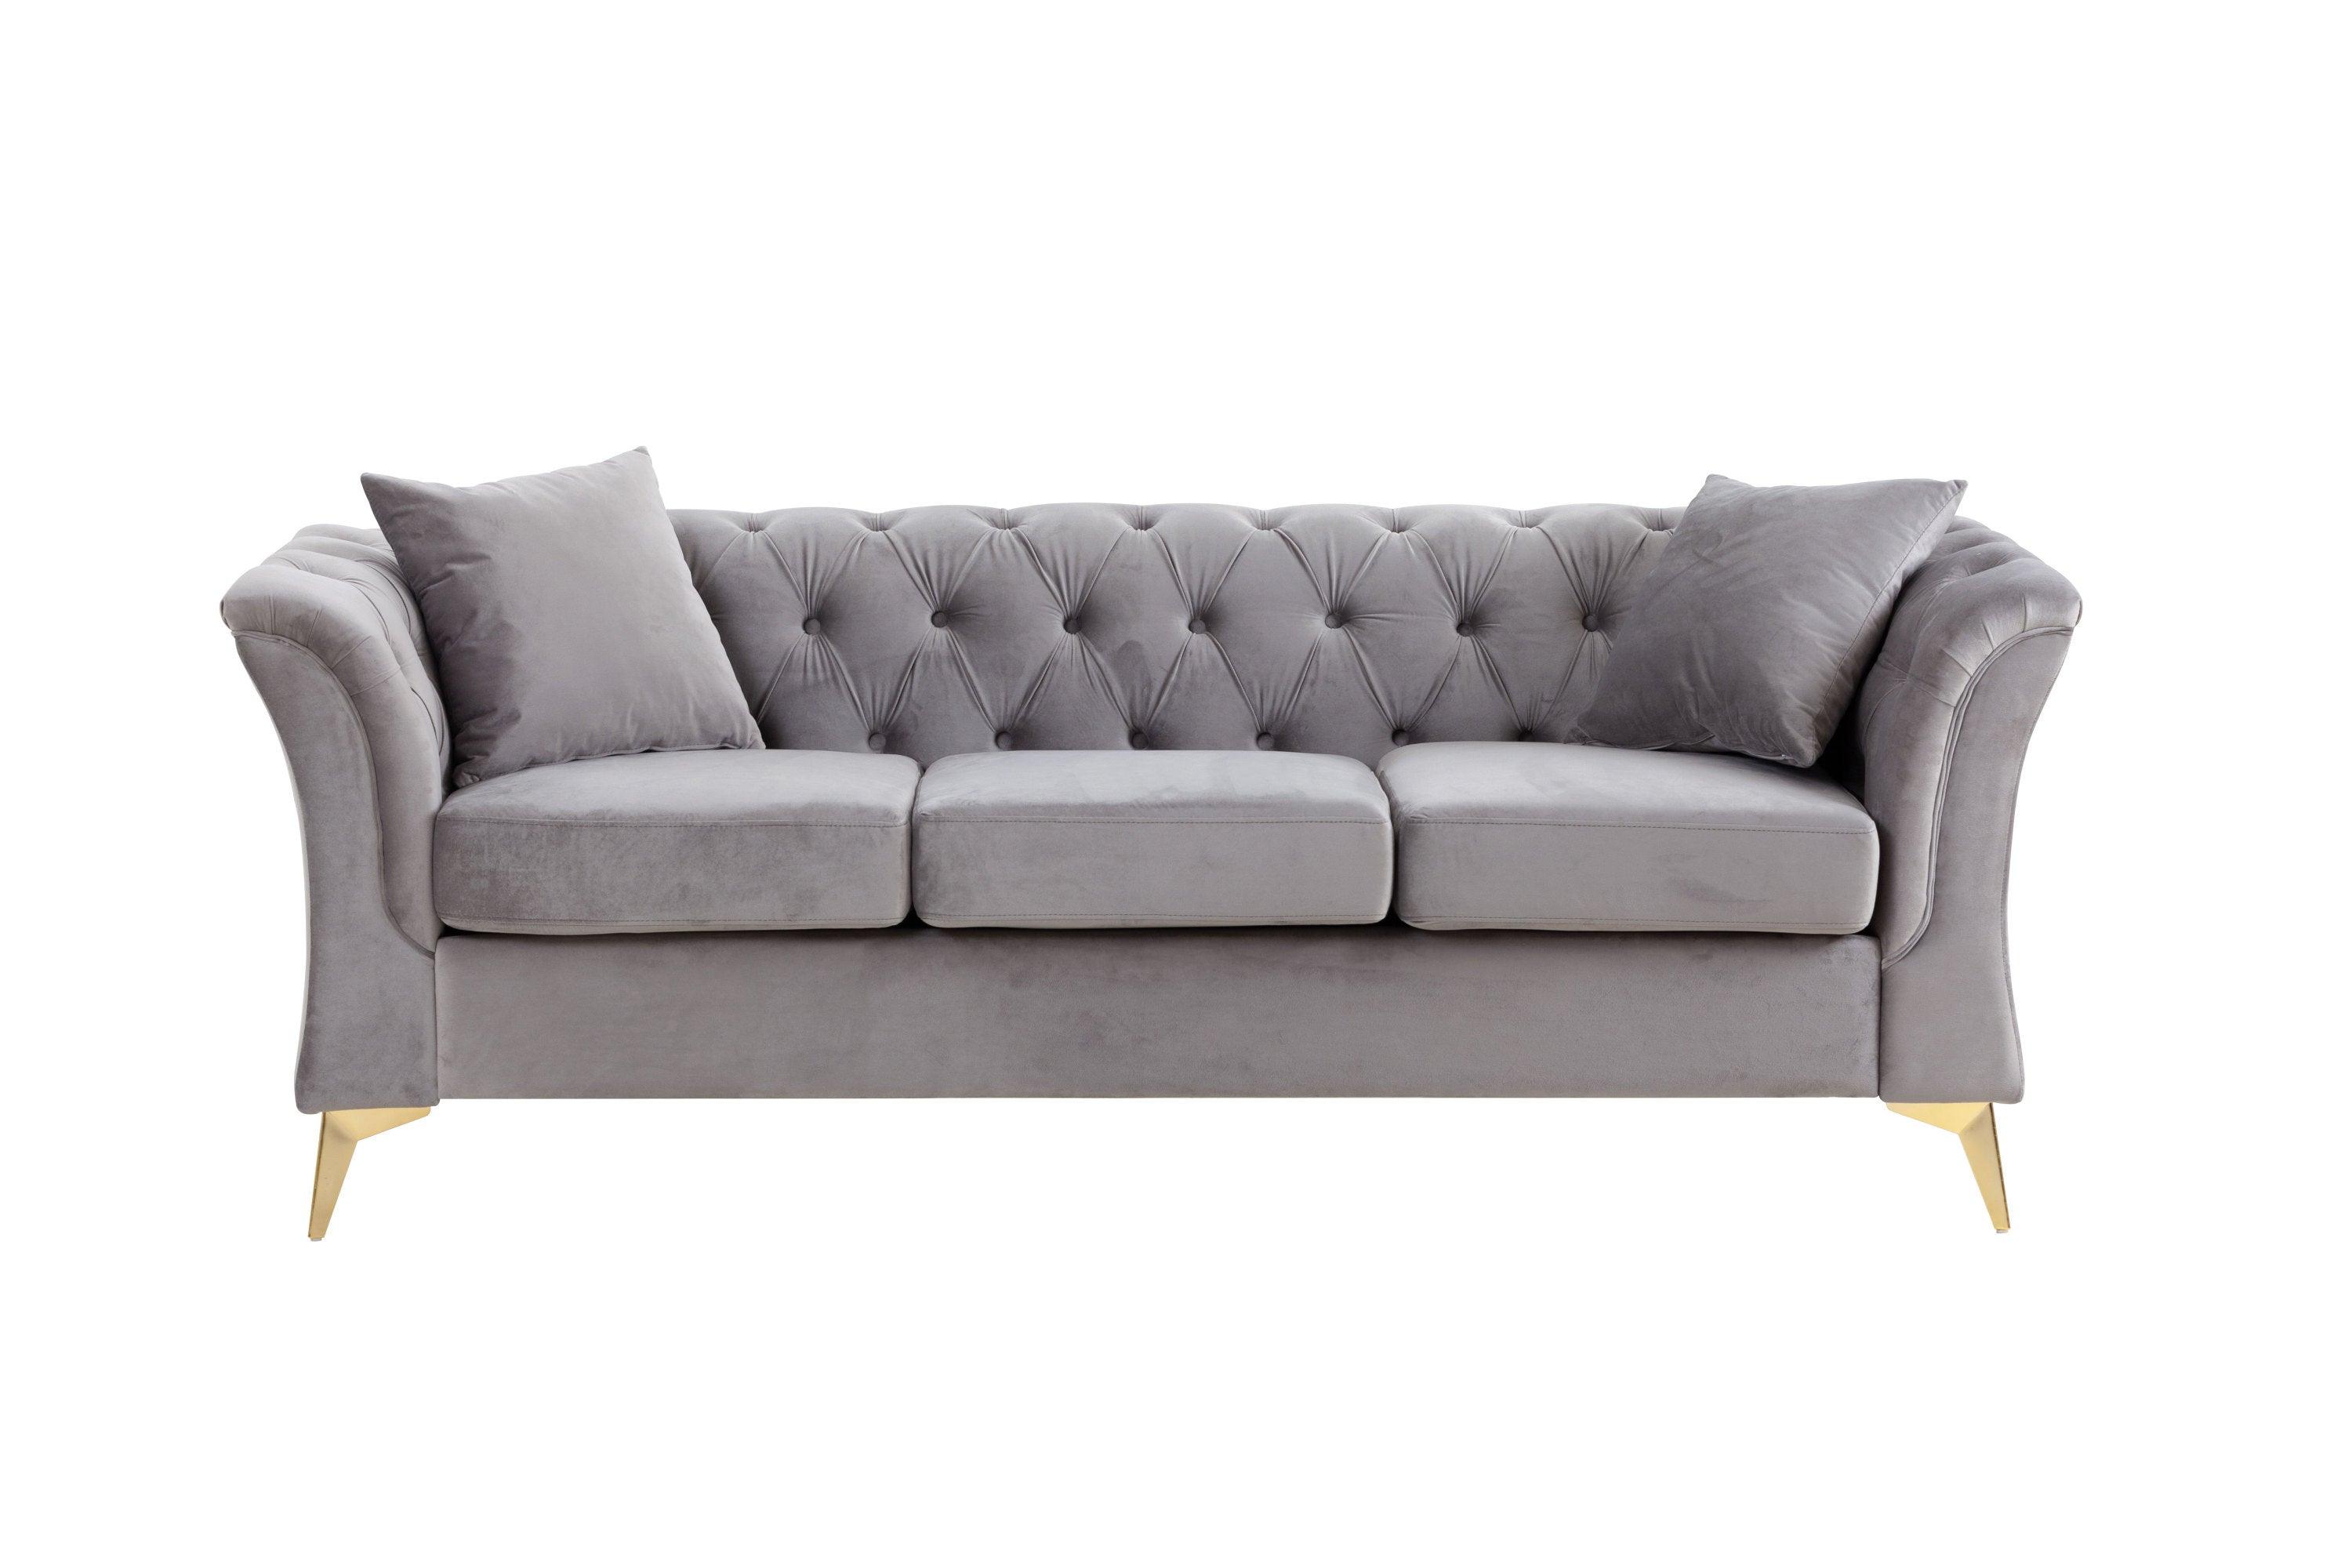 🆓🚛 Modern Chesterfield Curved Sofa Tufted Velvet Couch 3 Seat Button Tufed Couch With Scroll Arms & Gold Metal Legs Gray